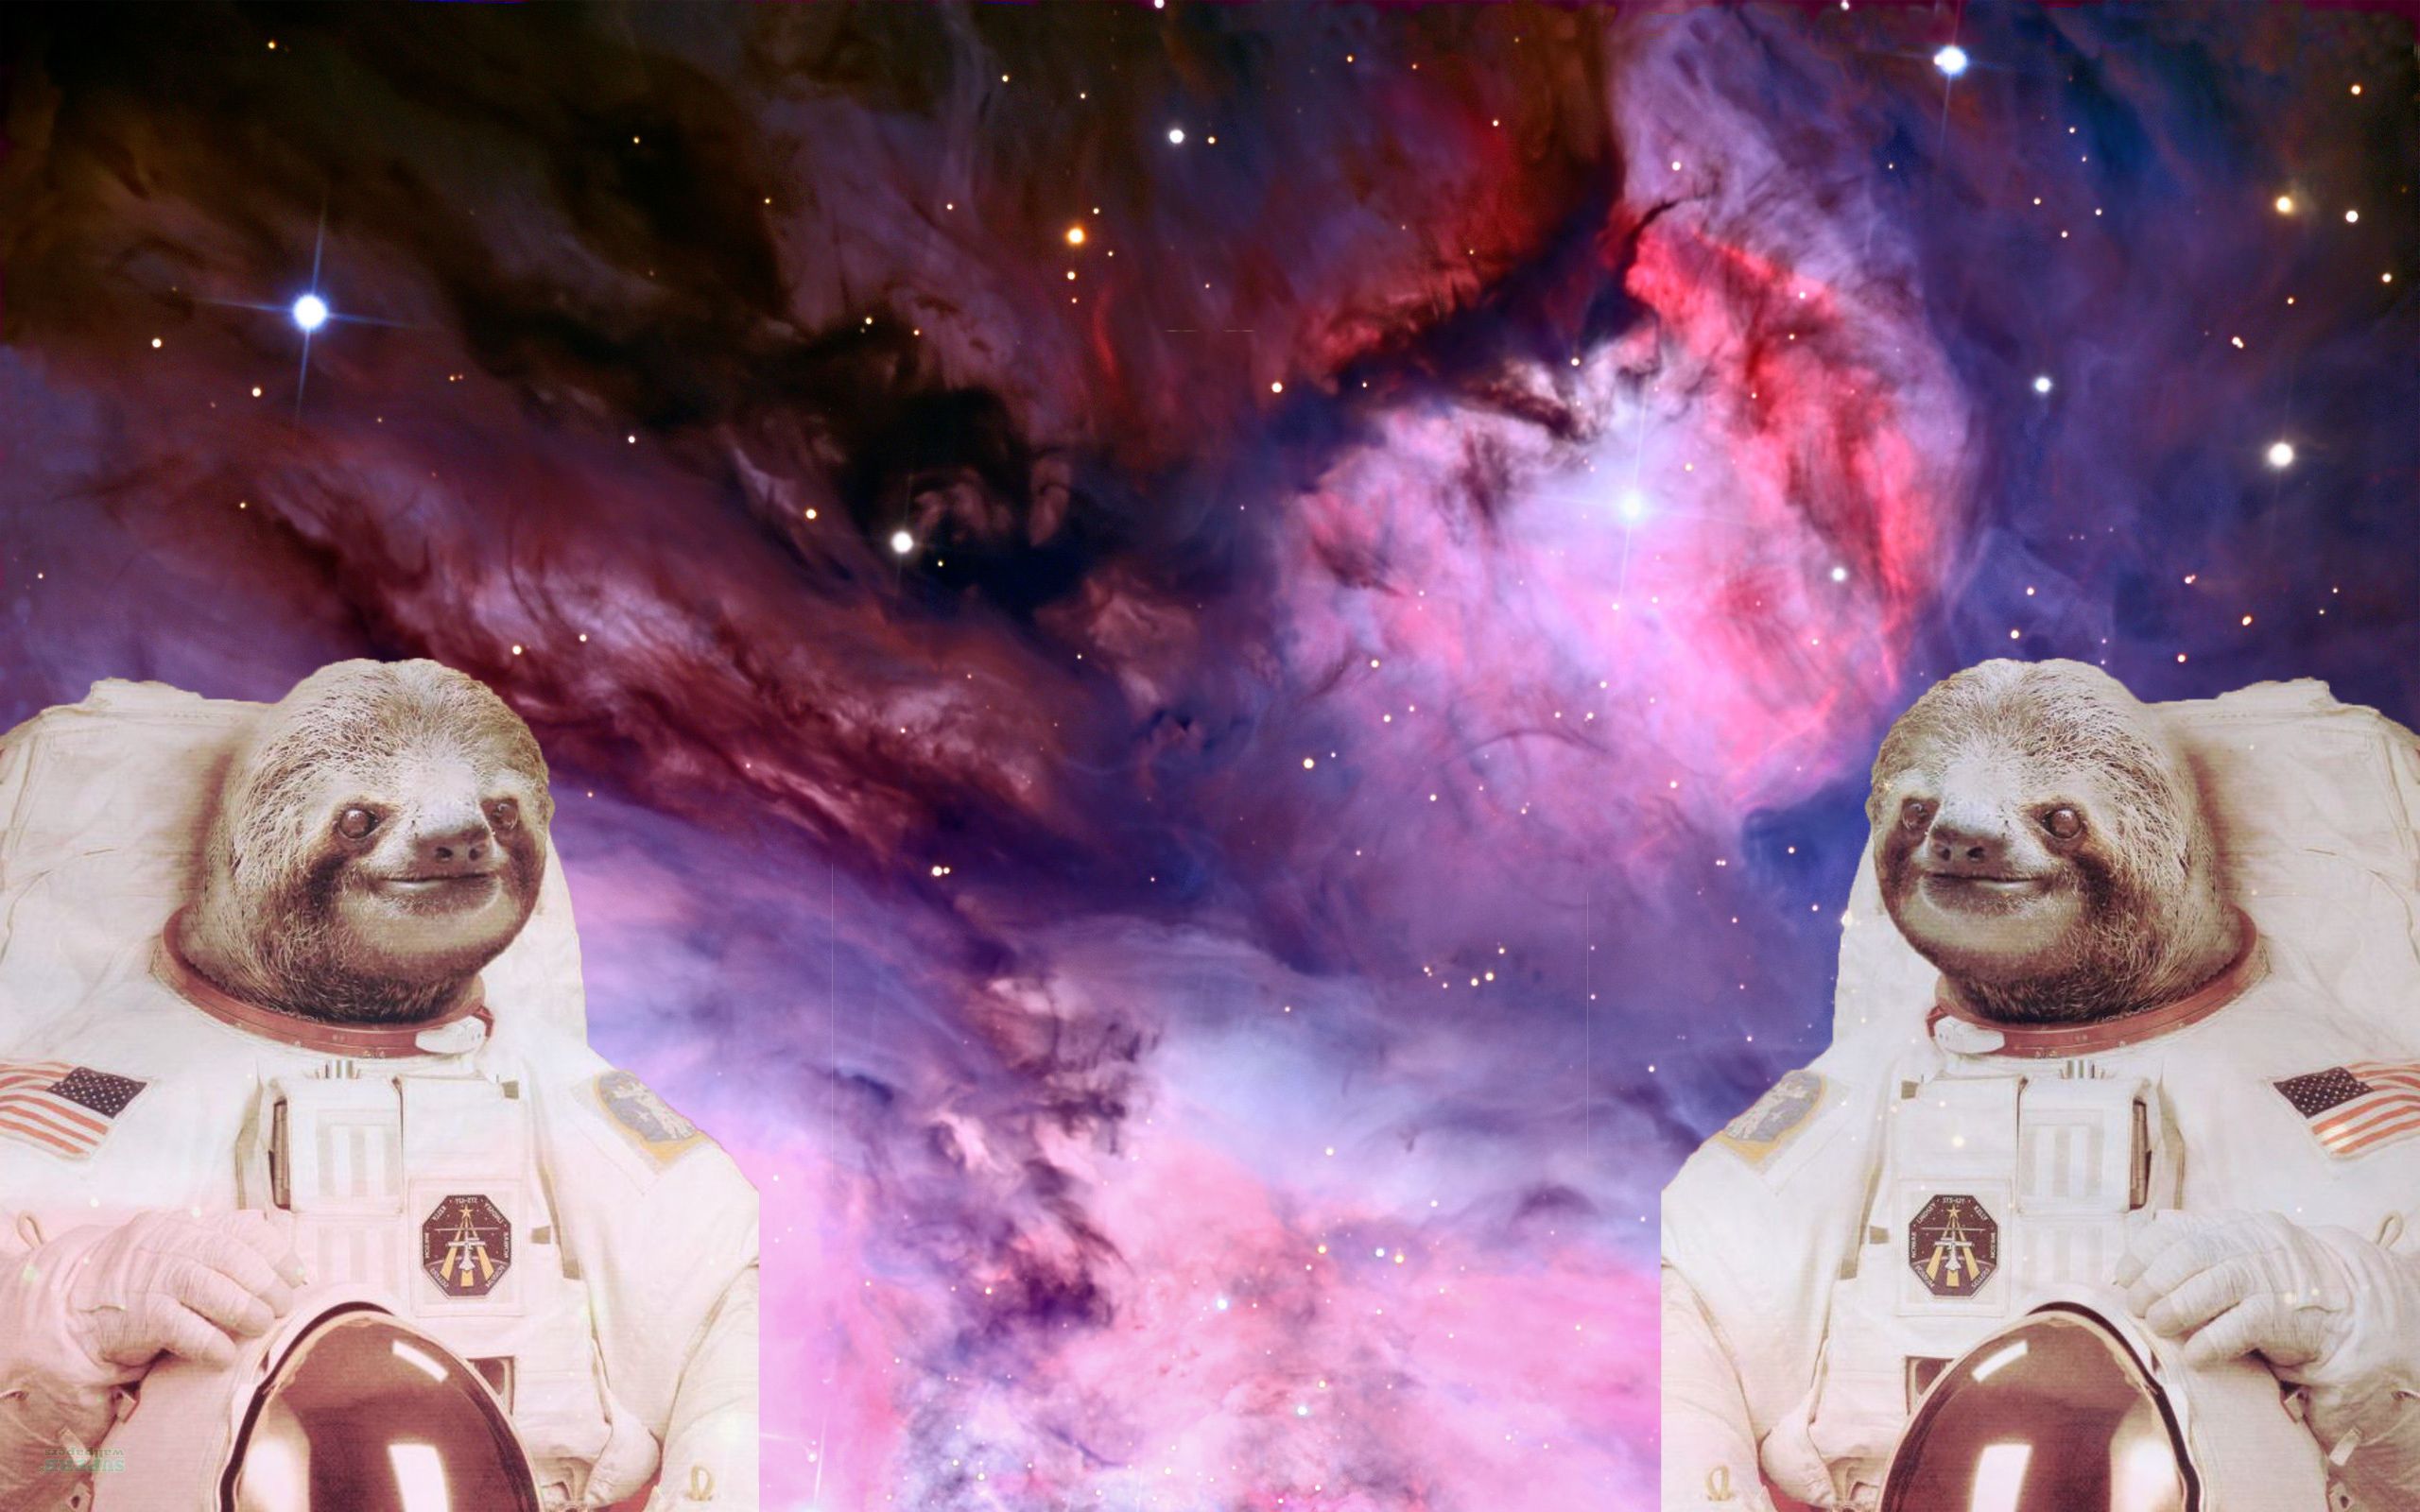 Astronaut Sloths in Space wallpaper I made wallpapers